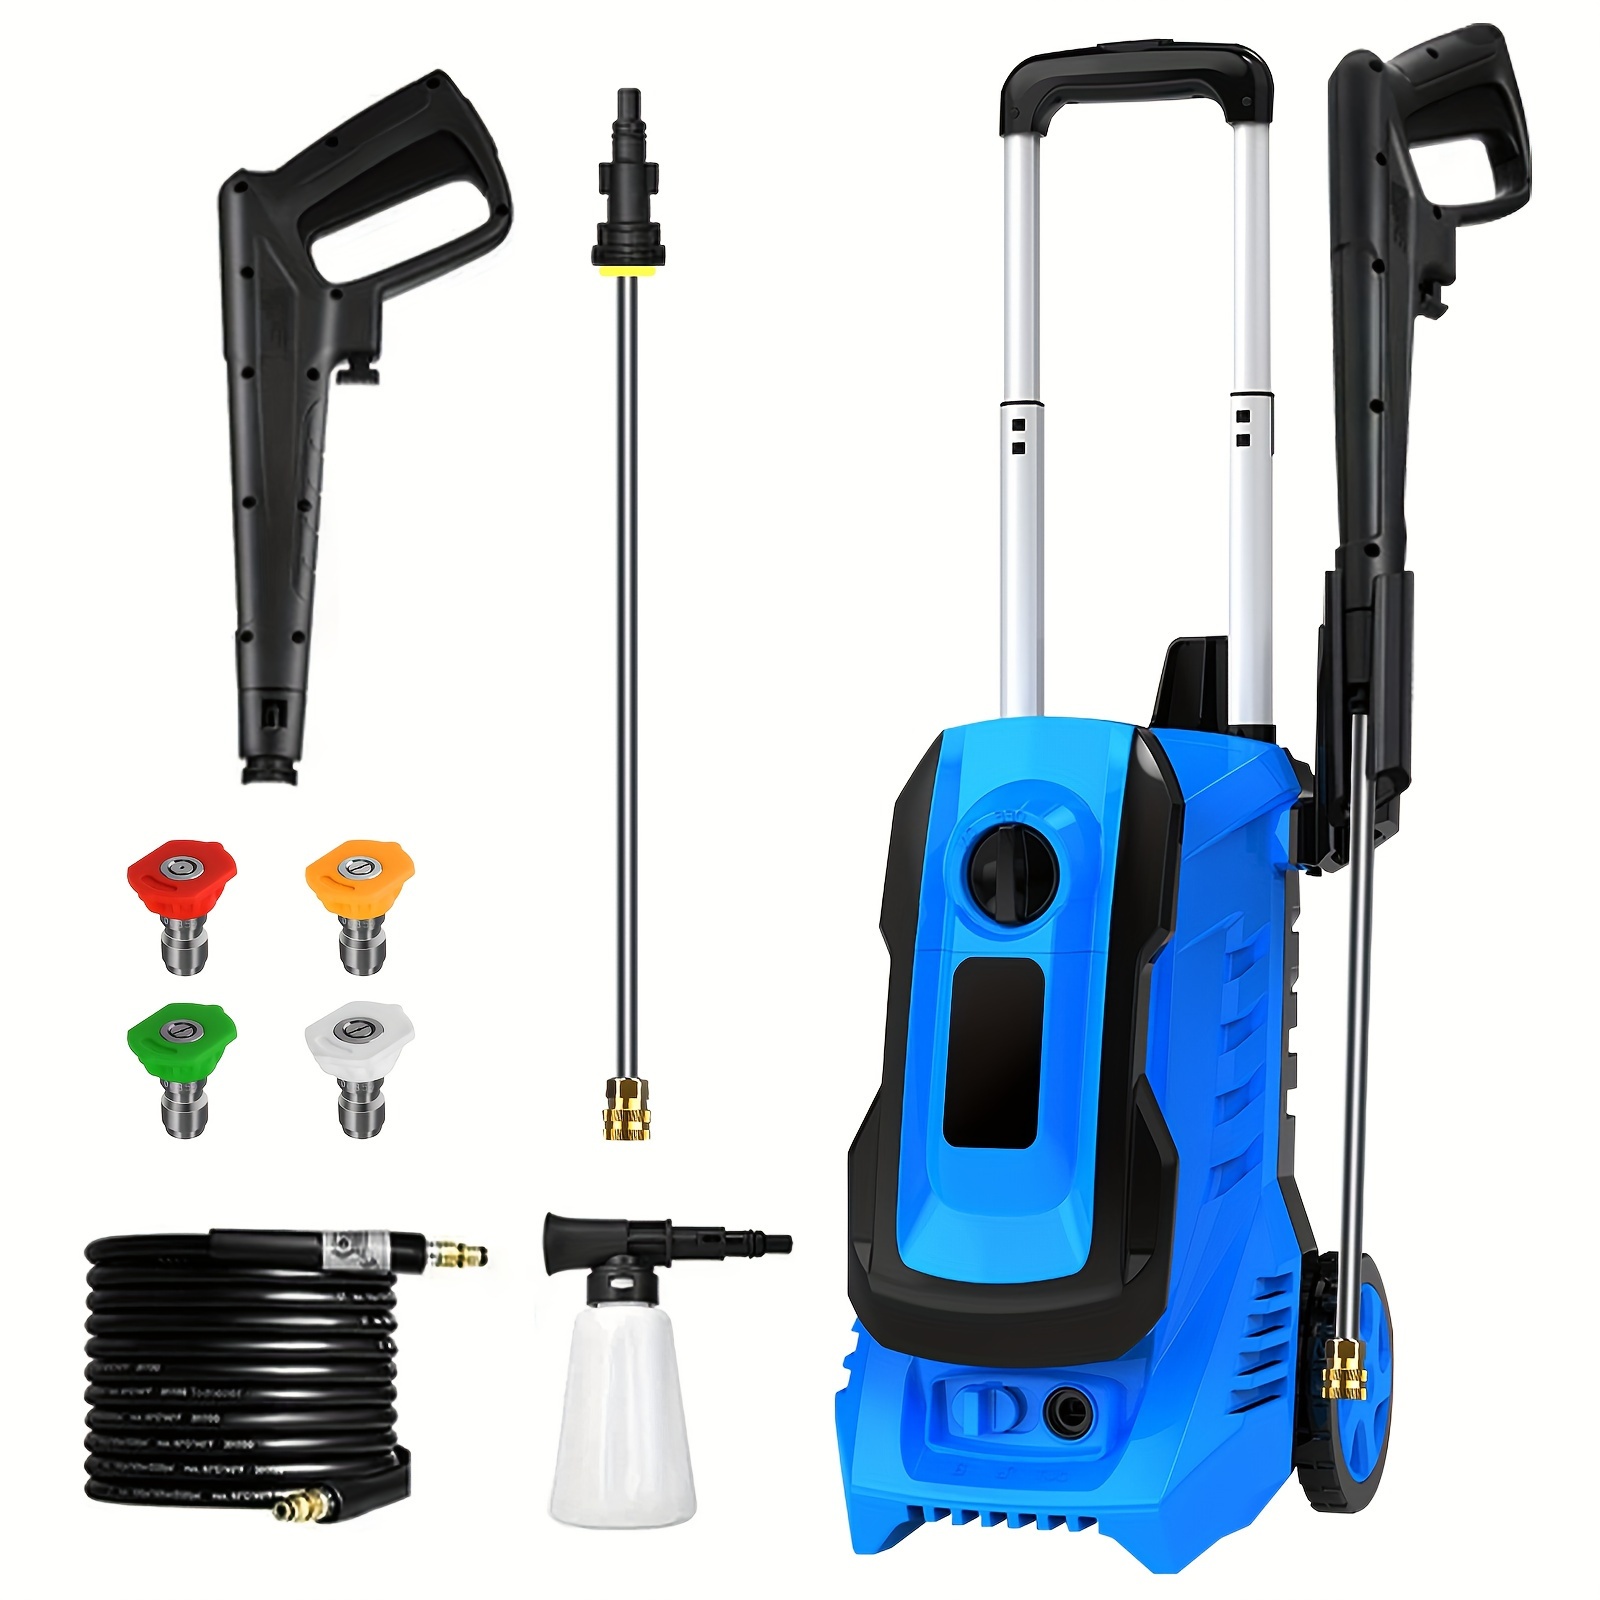 

Electric Pressure Washer 4000 Psi 2.6 Gpm, 25ft Hose & 36ft Cords Car Washer Machine With Foam Cannon, 4 Nozzle Tips, Telescopic Handle - Portable Electric Power Washer For Patio, Deck, Fence (blue)